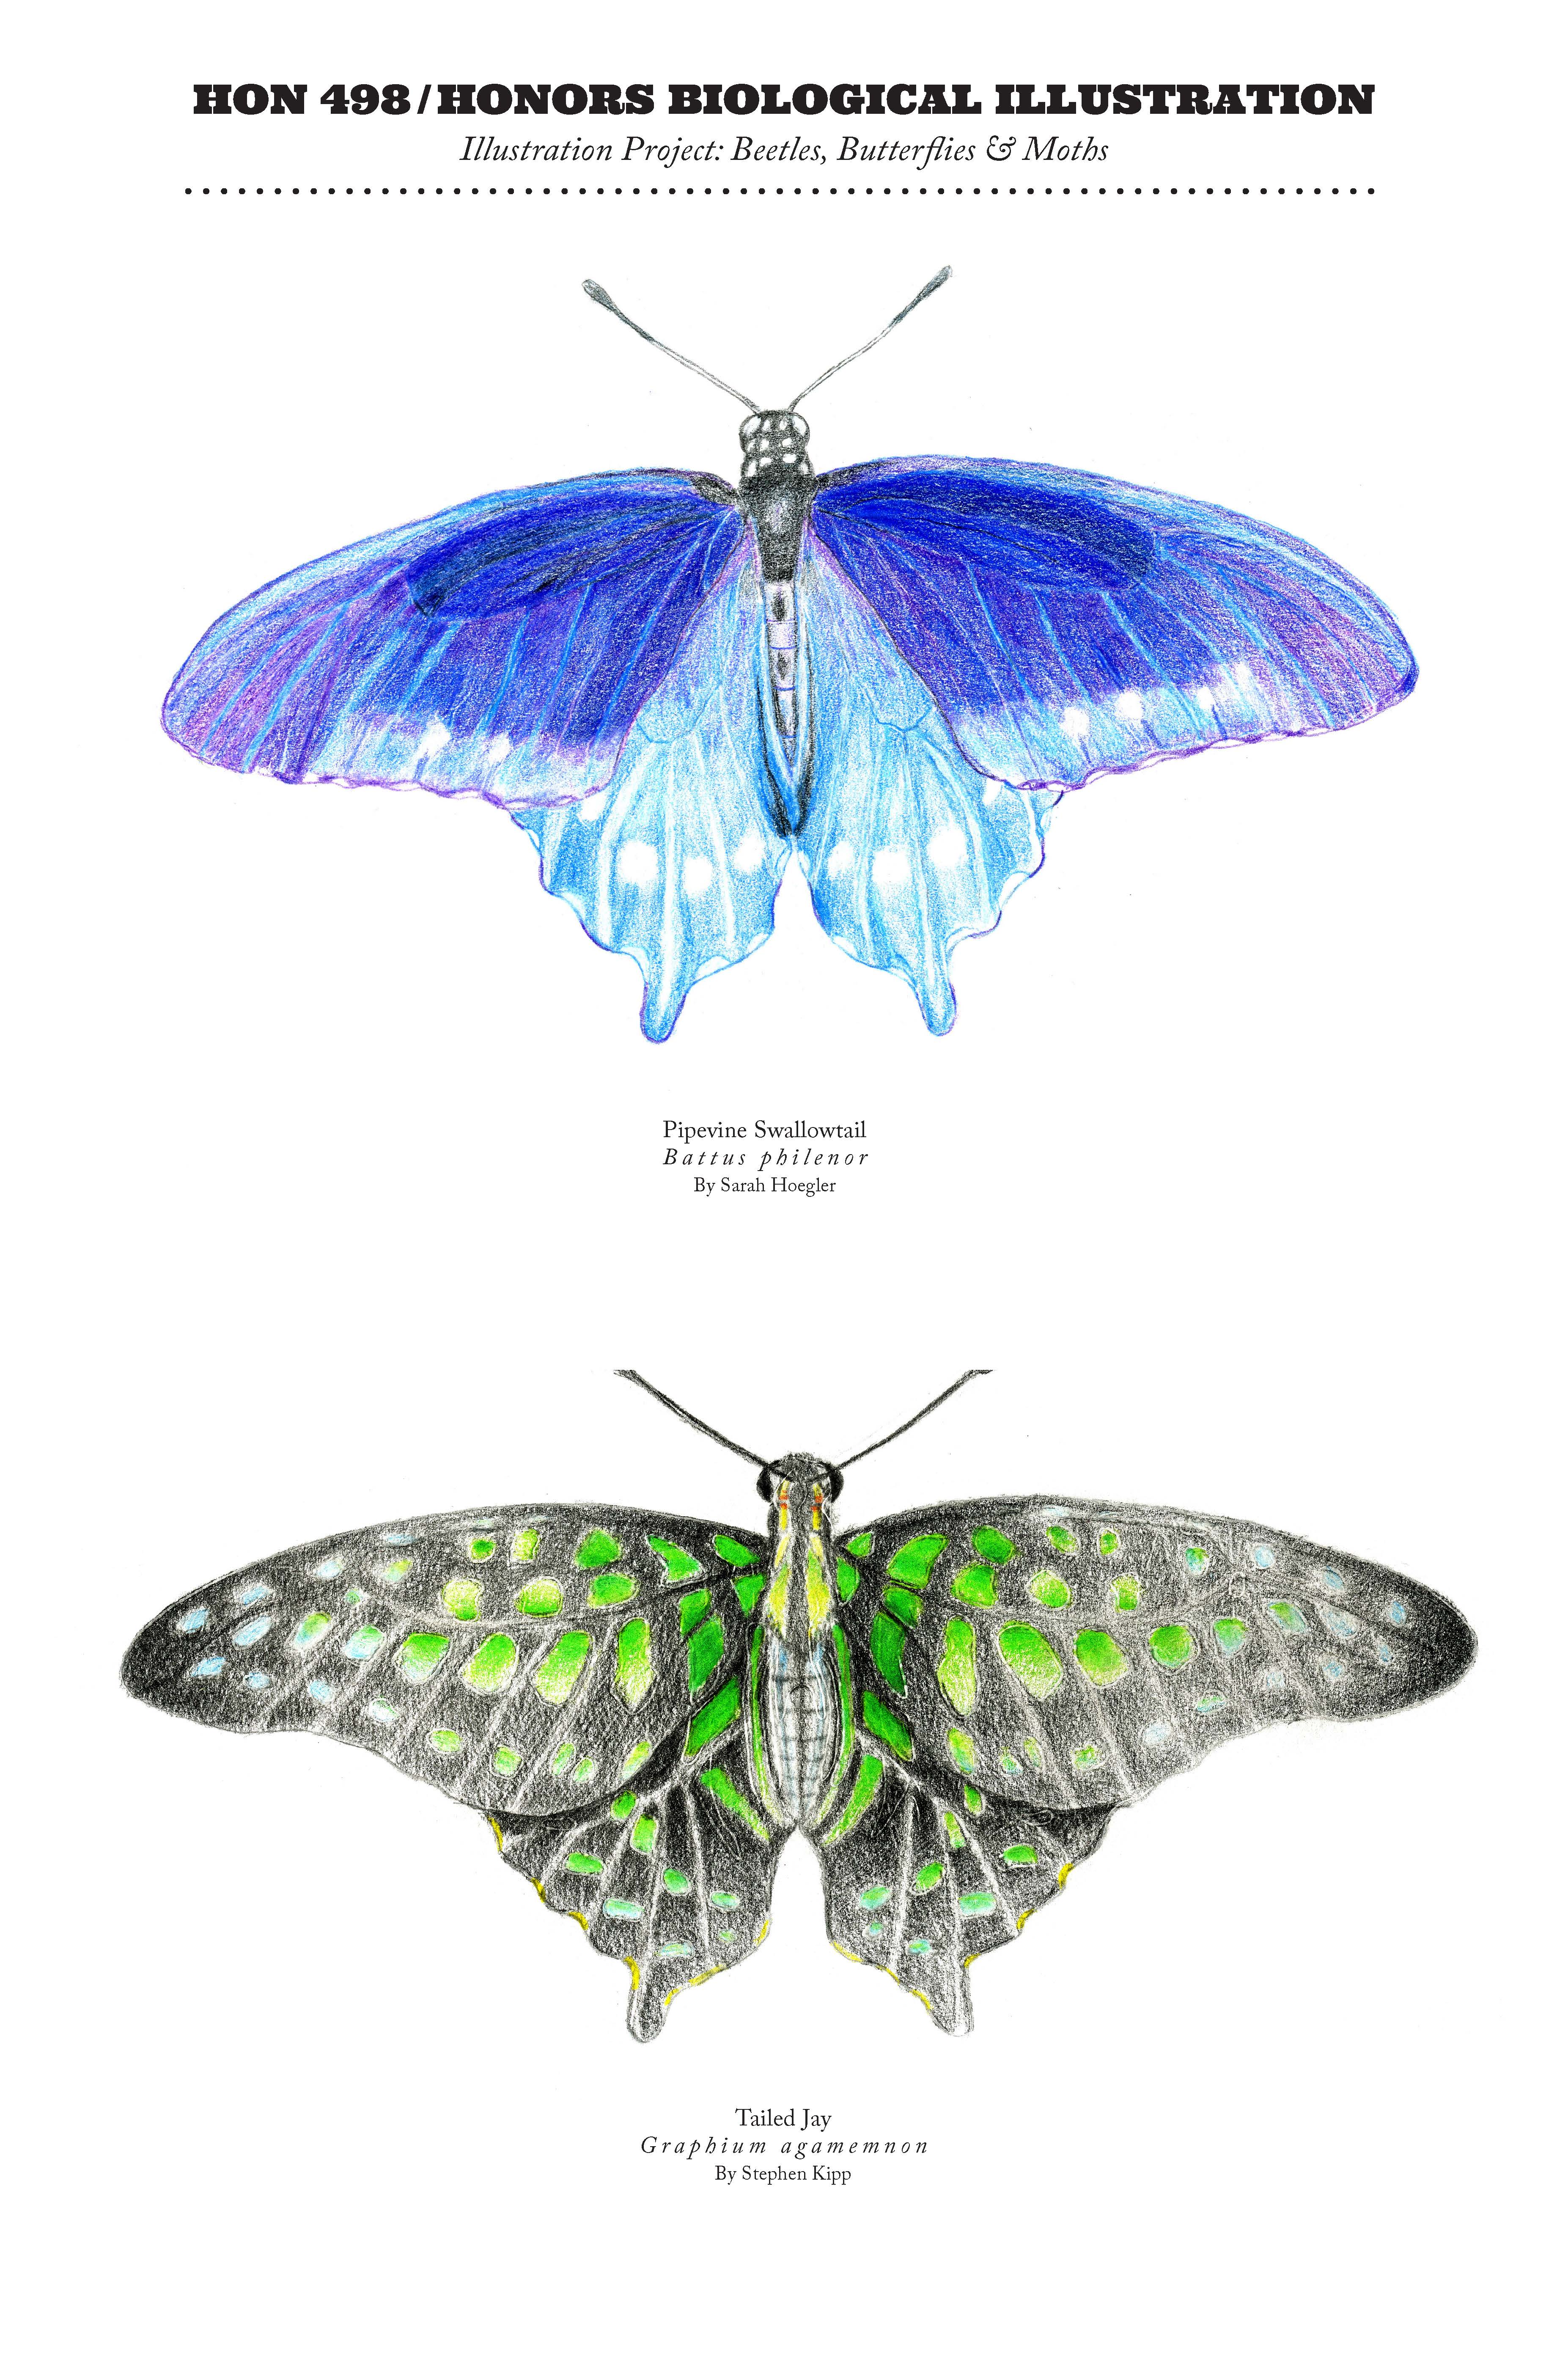 Drawings for Biological Illustration course. A blue butterfly is on the top, and a black and green butterfly is on the bottom.